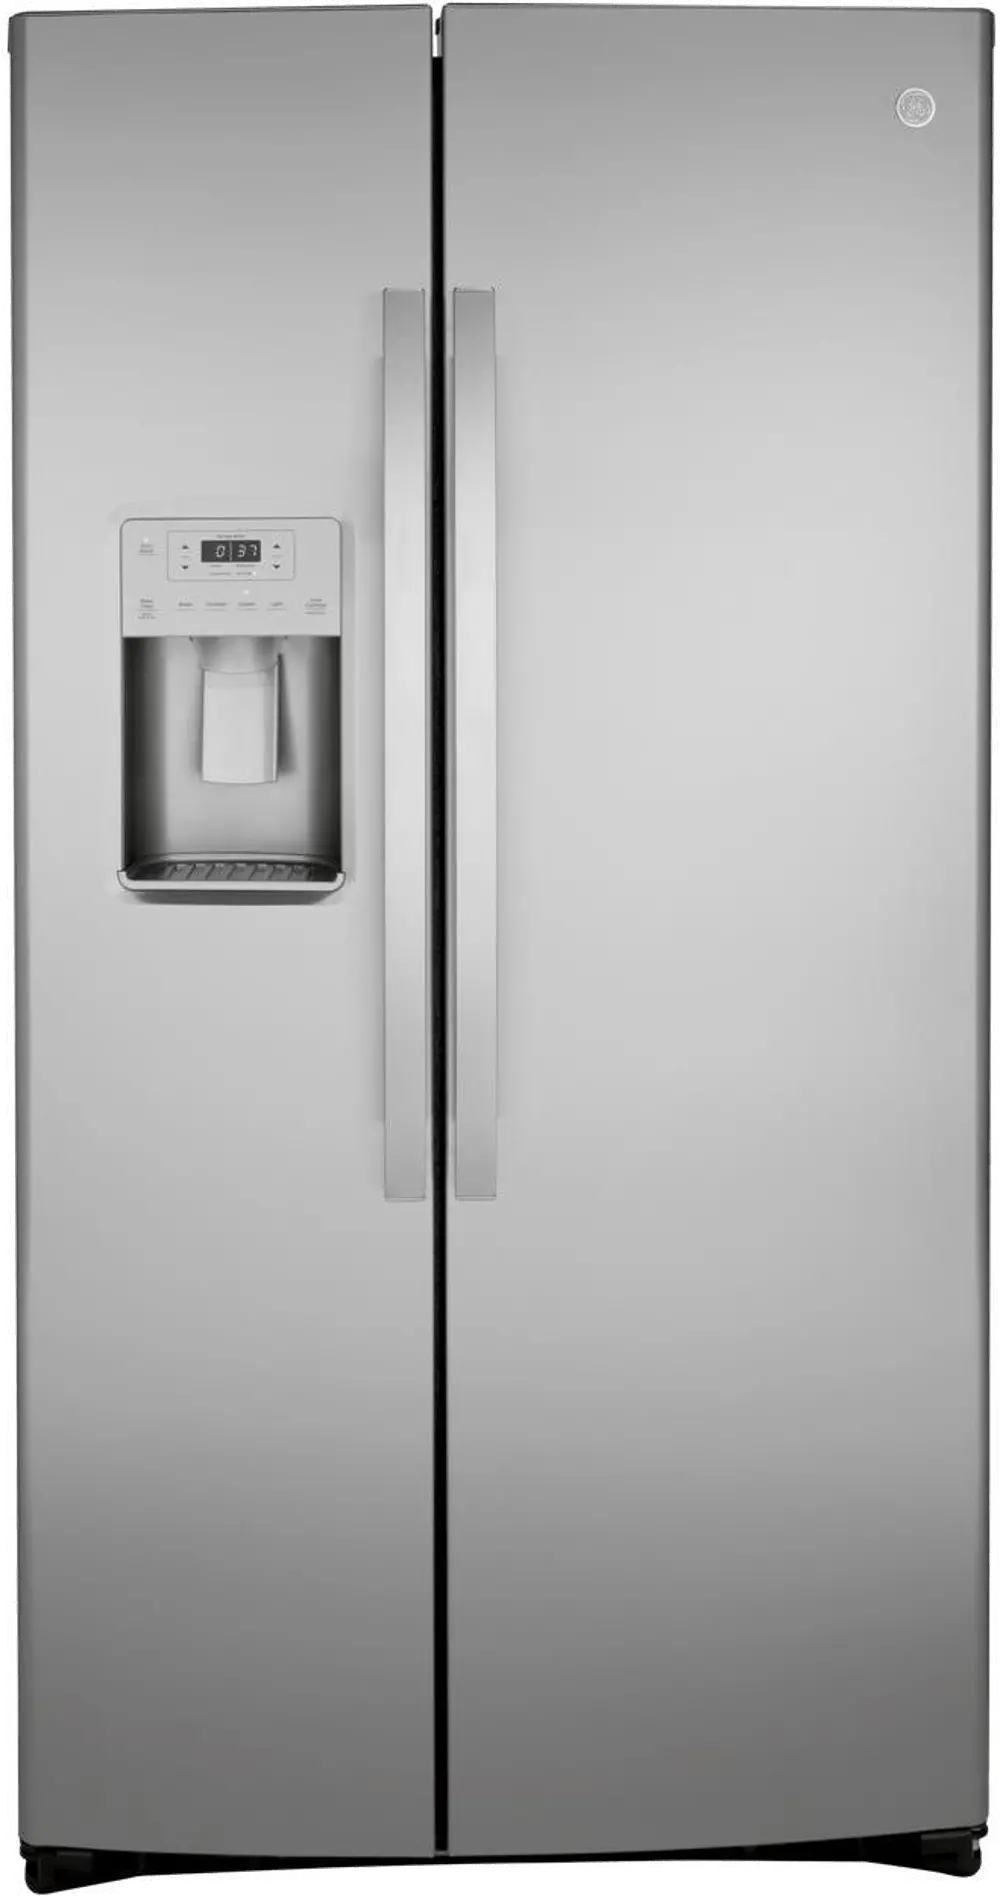 GSS25IYNFS GE 25.1 cu ft Side by Side Refrigerator - Stainless Steel-1